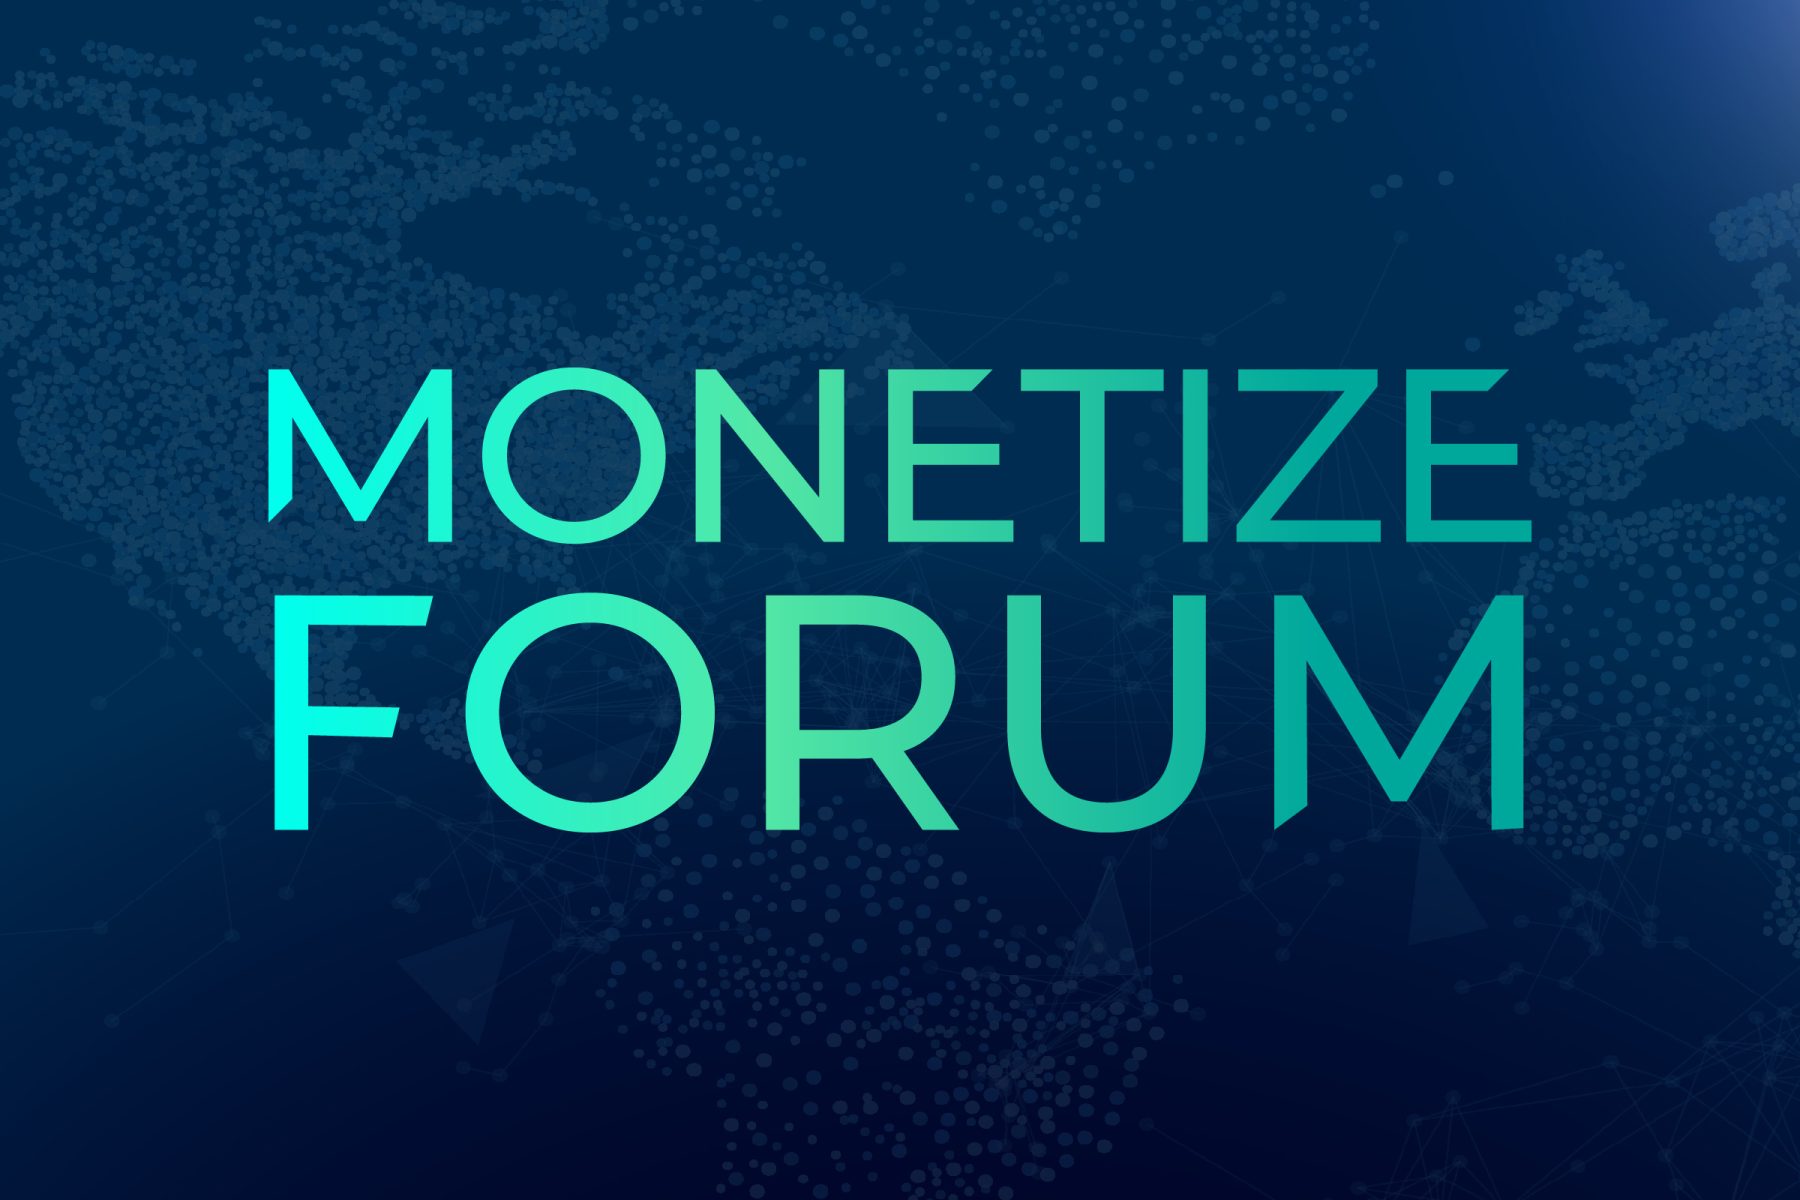 Monetize Forum text overlayed a global map